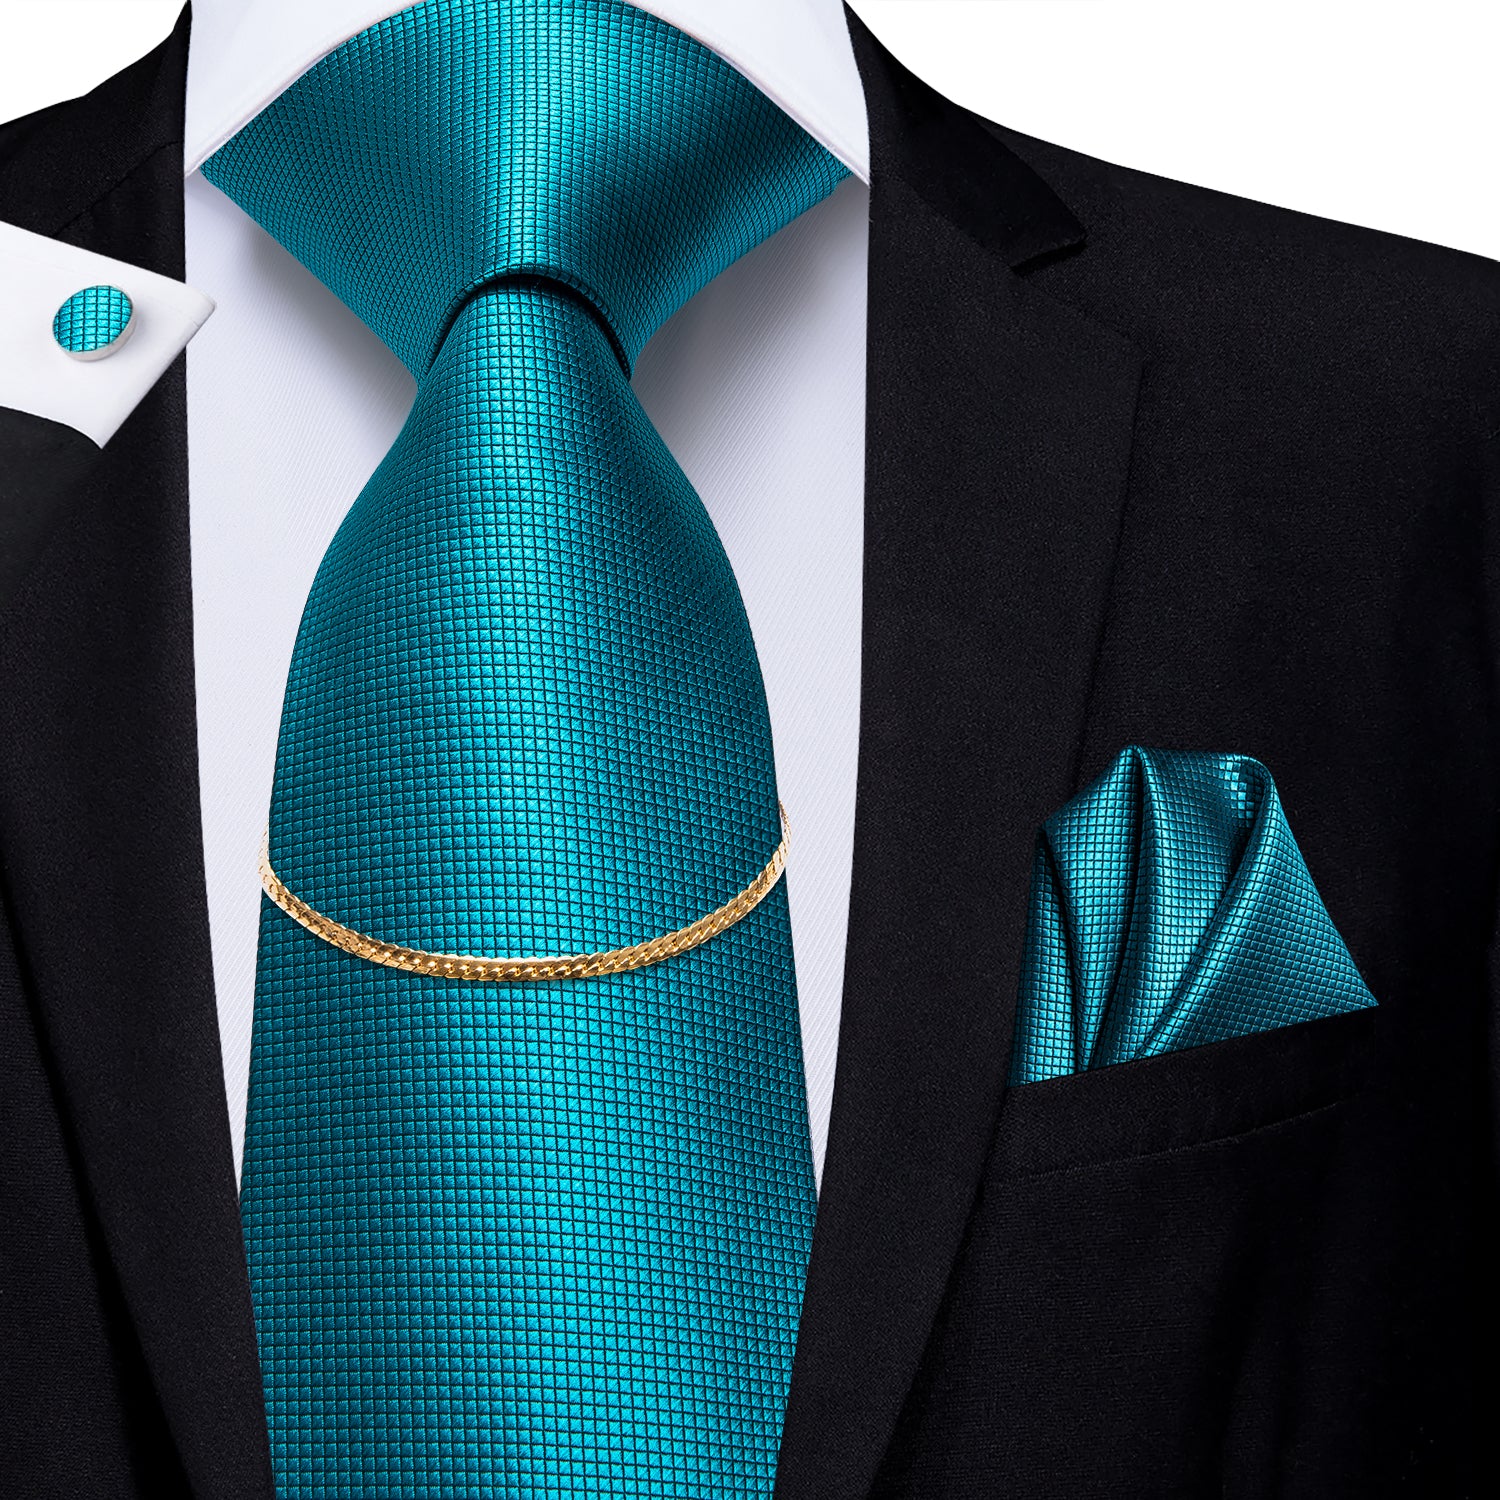 Teal Blue Solid Tie Pocket Square Cufflinks Set With Golden Chain